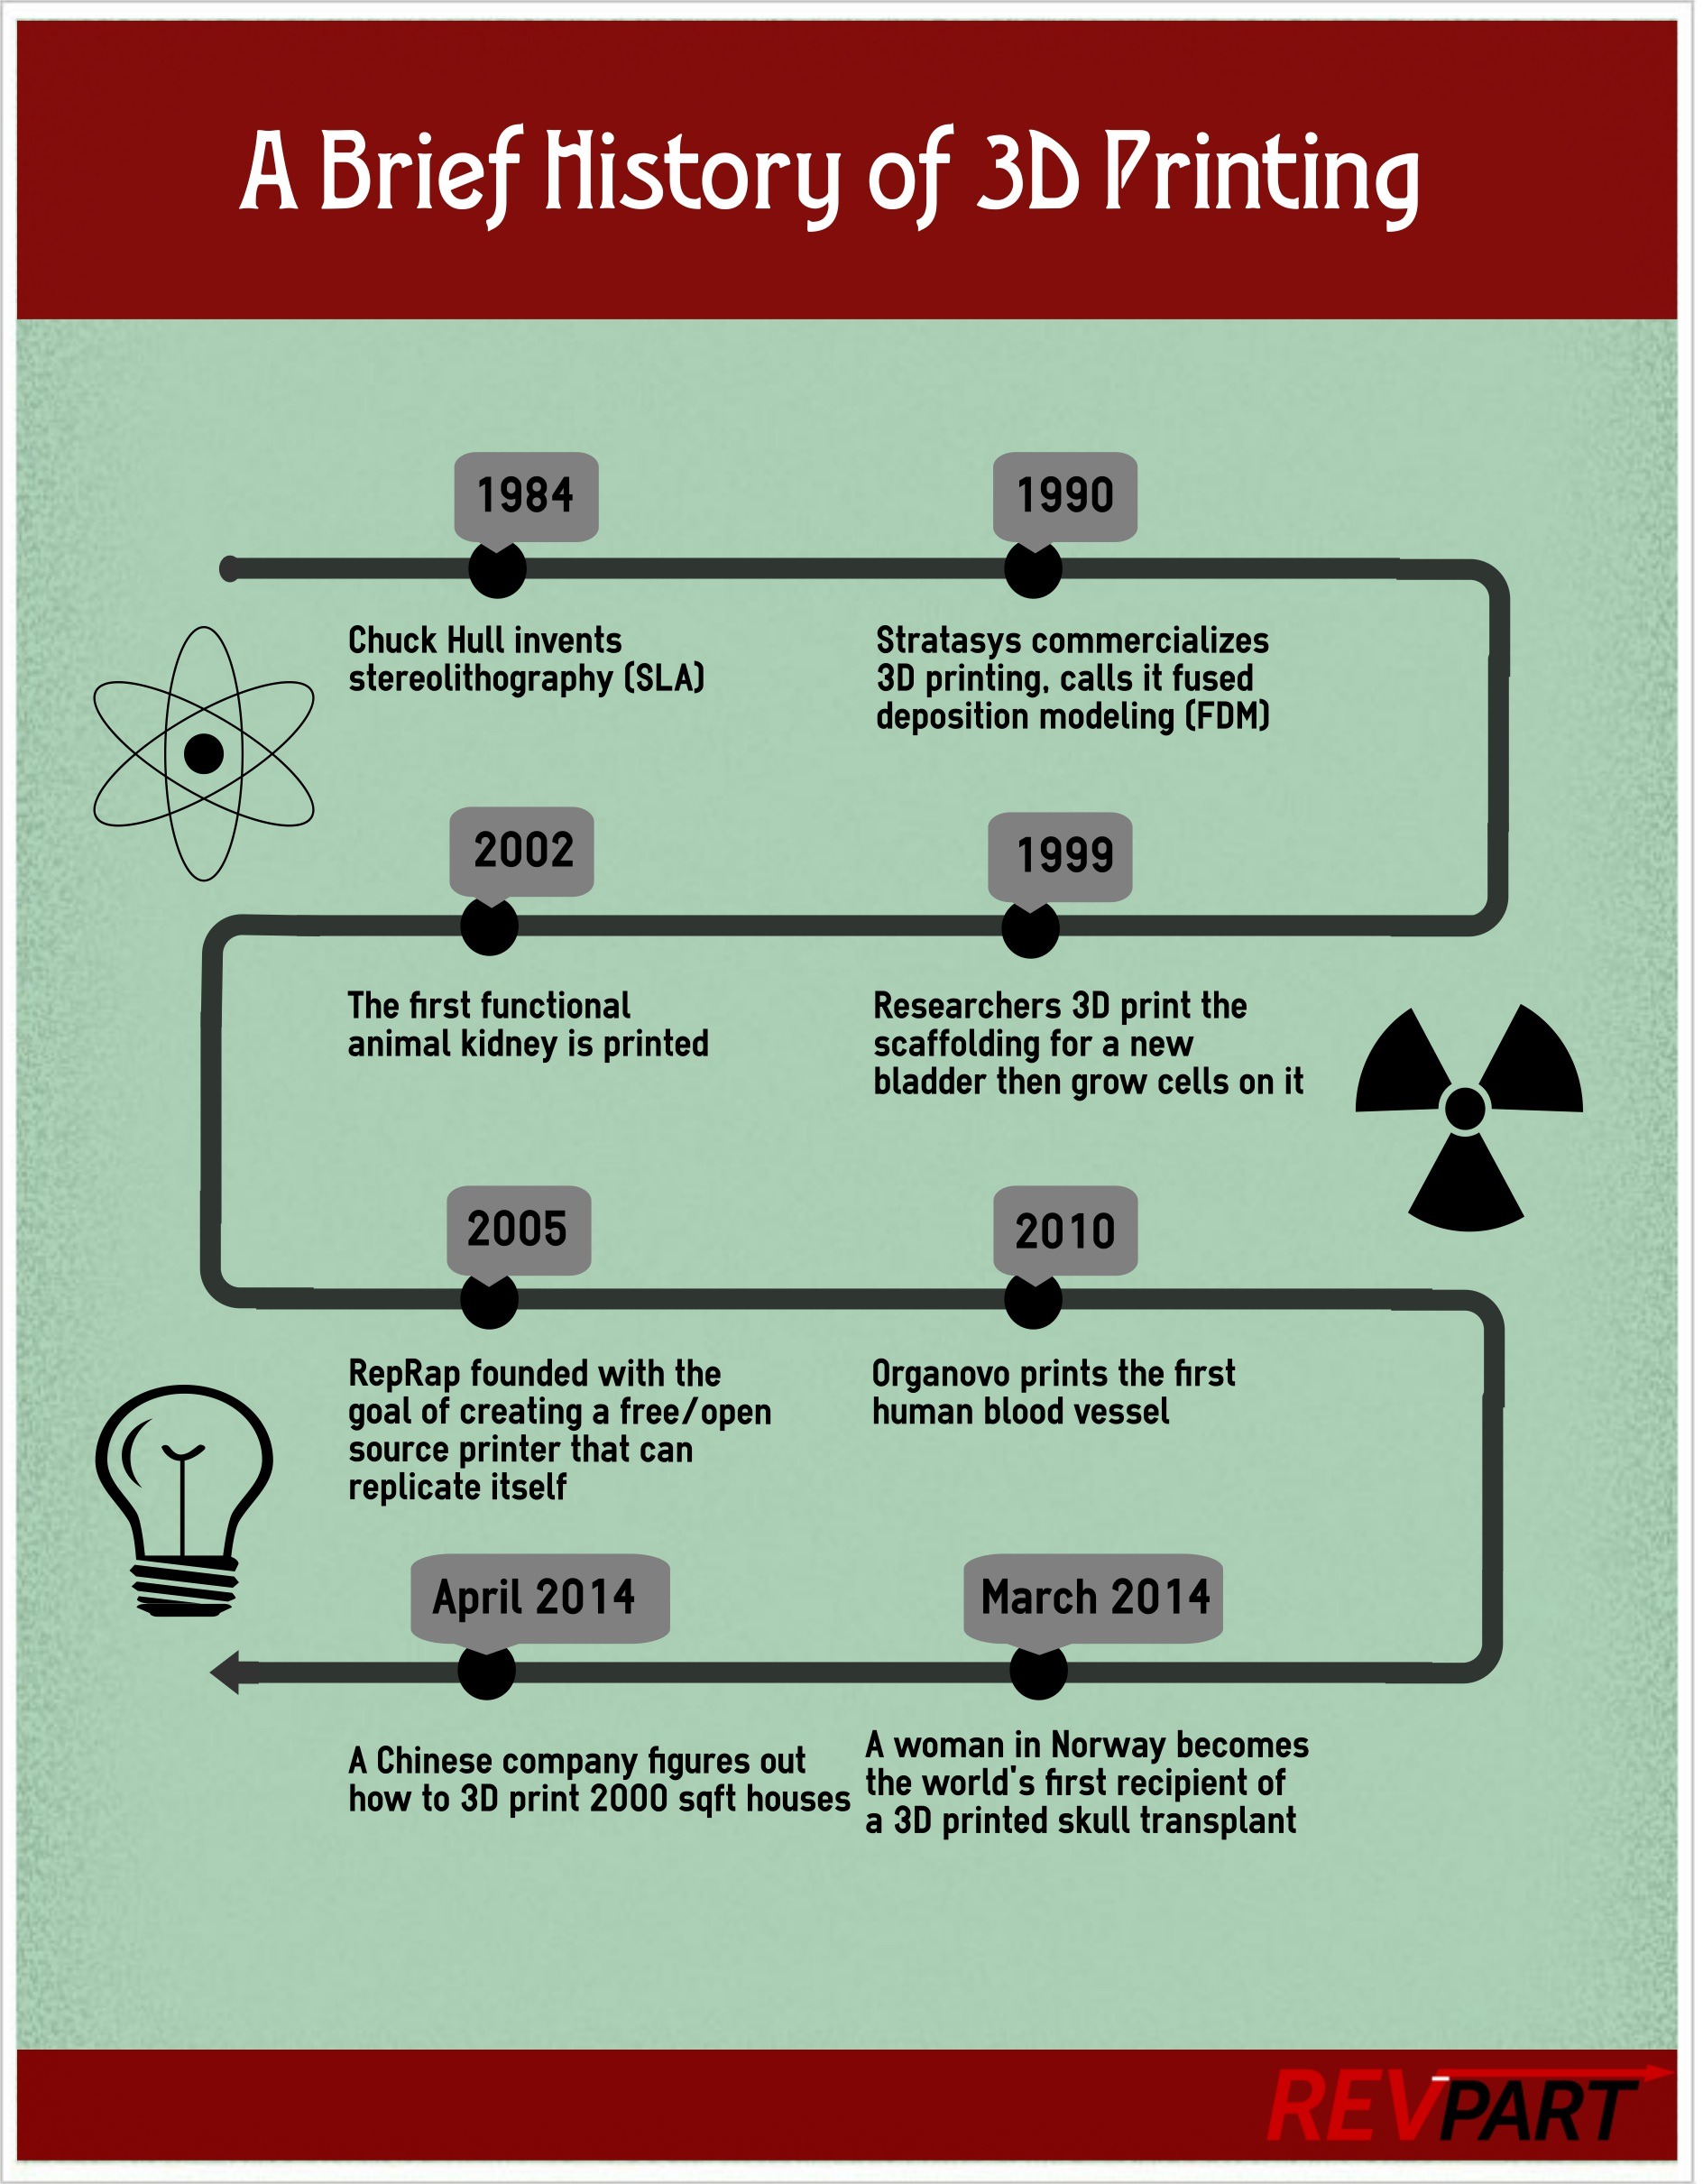 a brief history of 3D printing